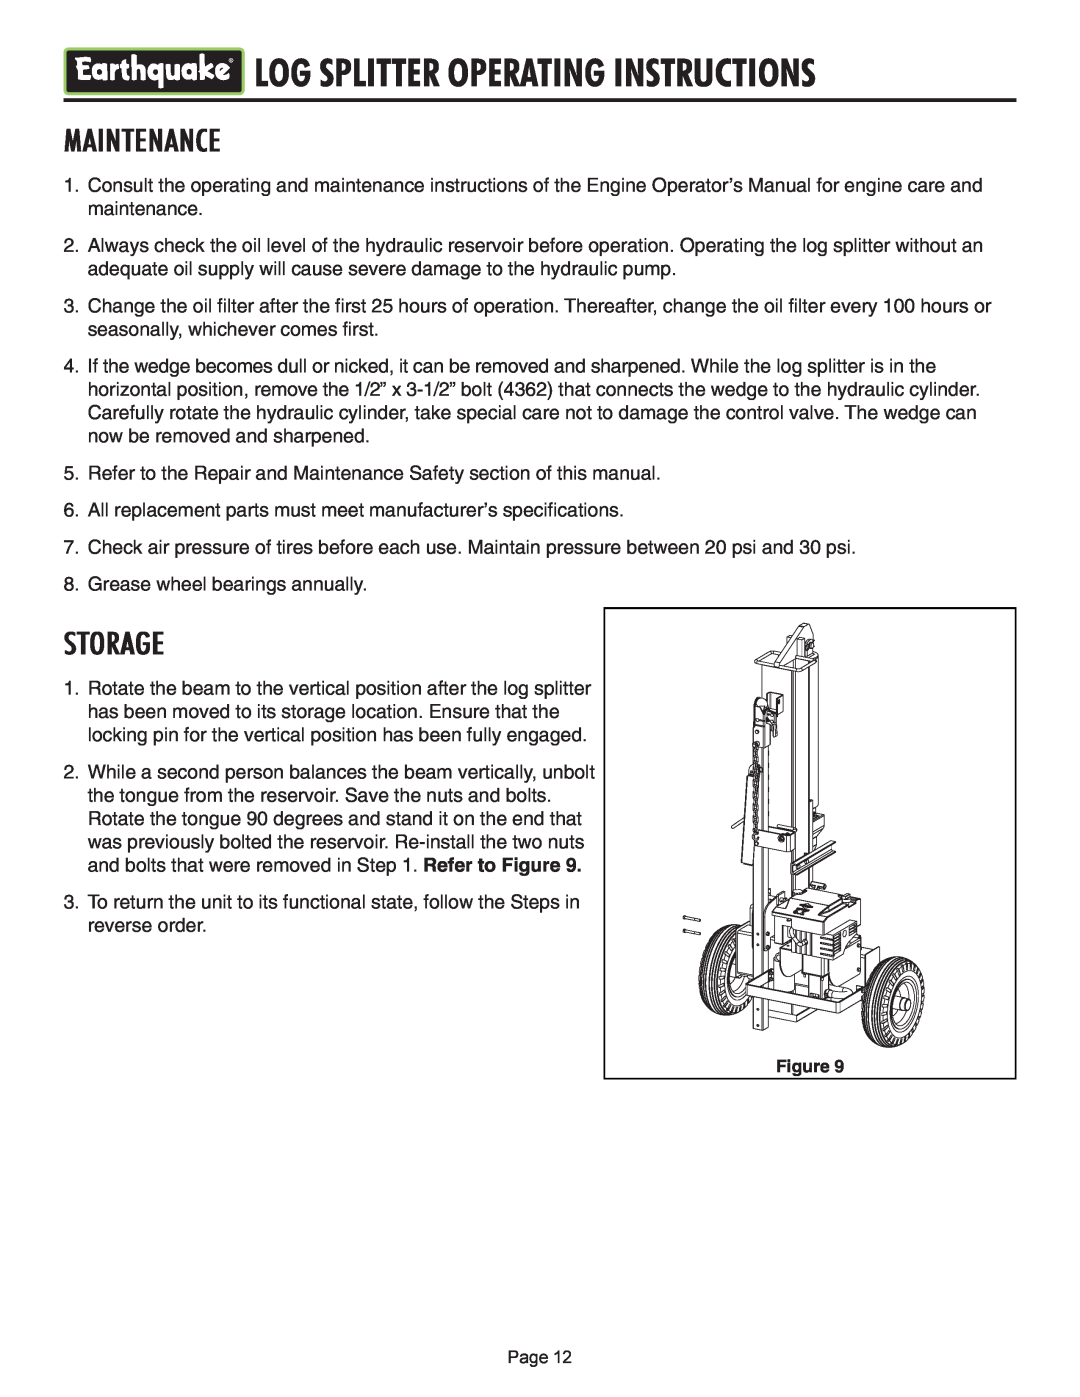 EarthQuake W2808, W2265 operating instructions Grease wheel bearings annually 